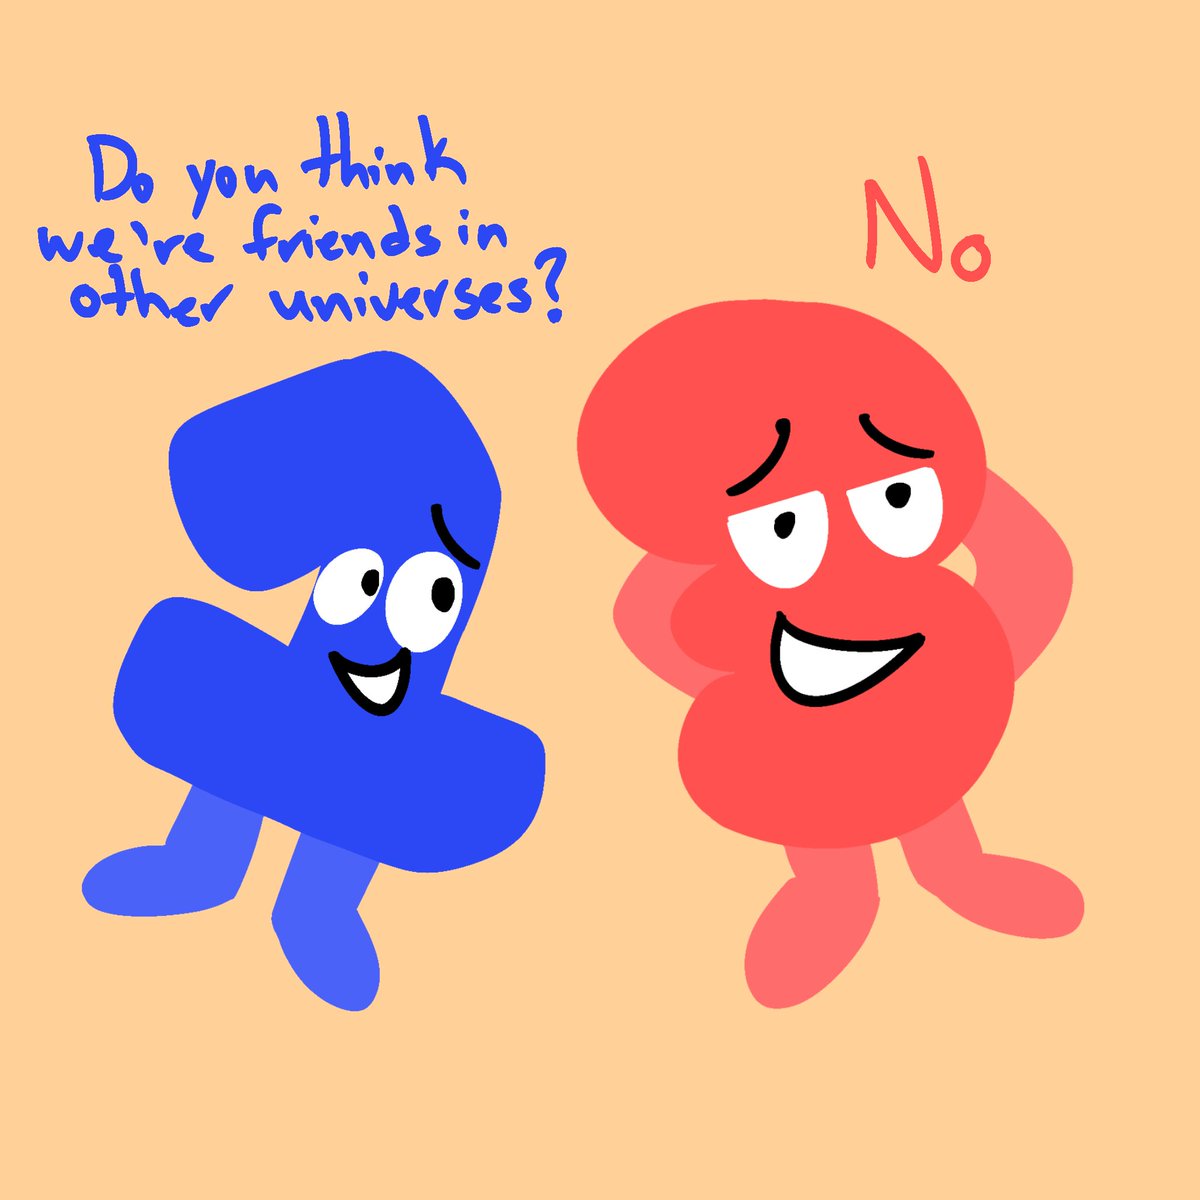 #bfdi #xfohv 
They share one braincell